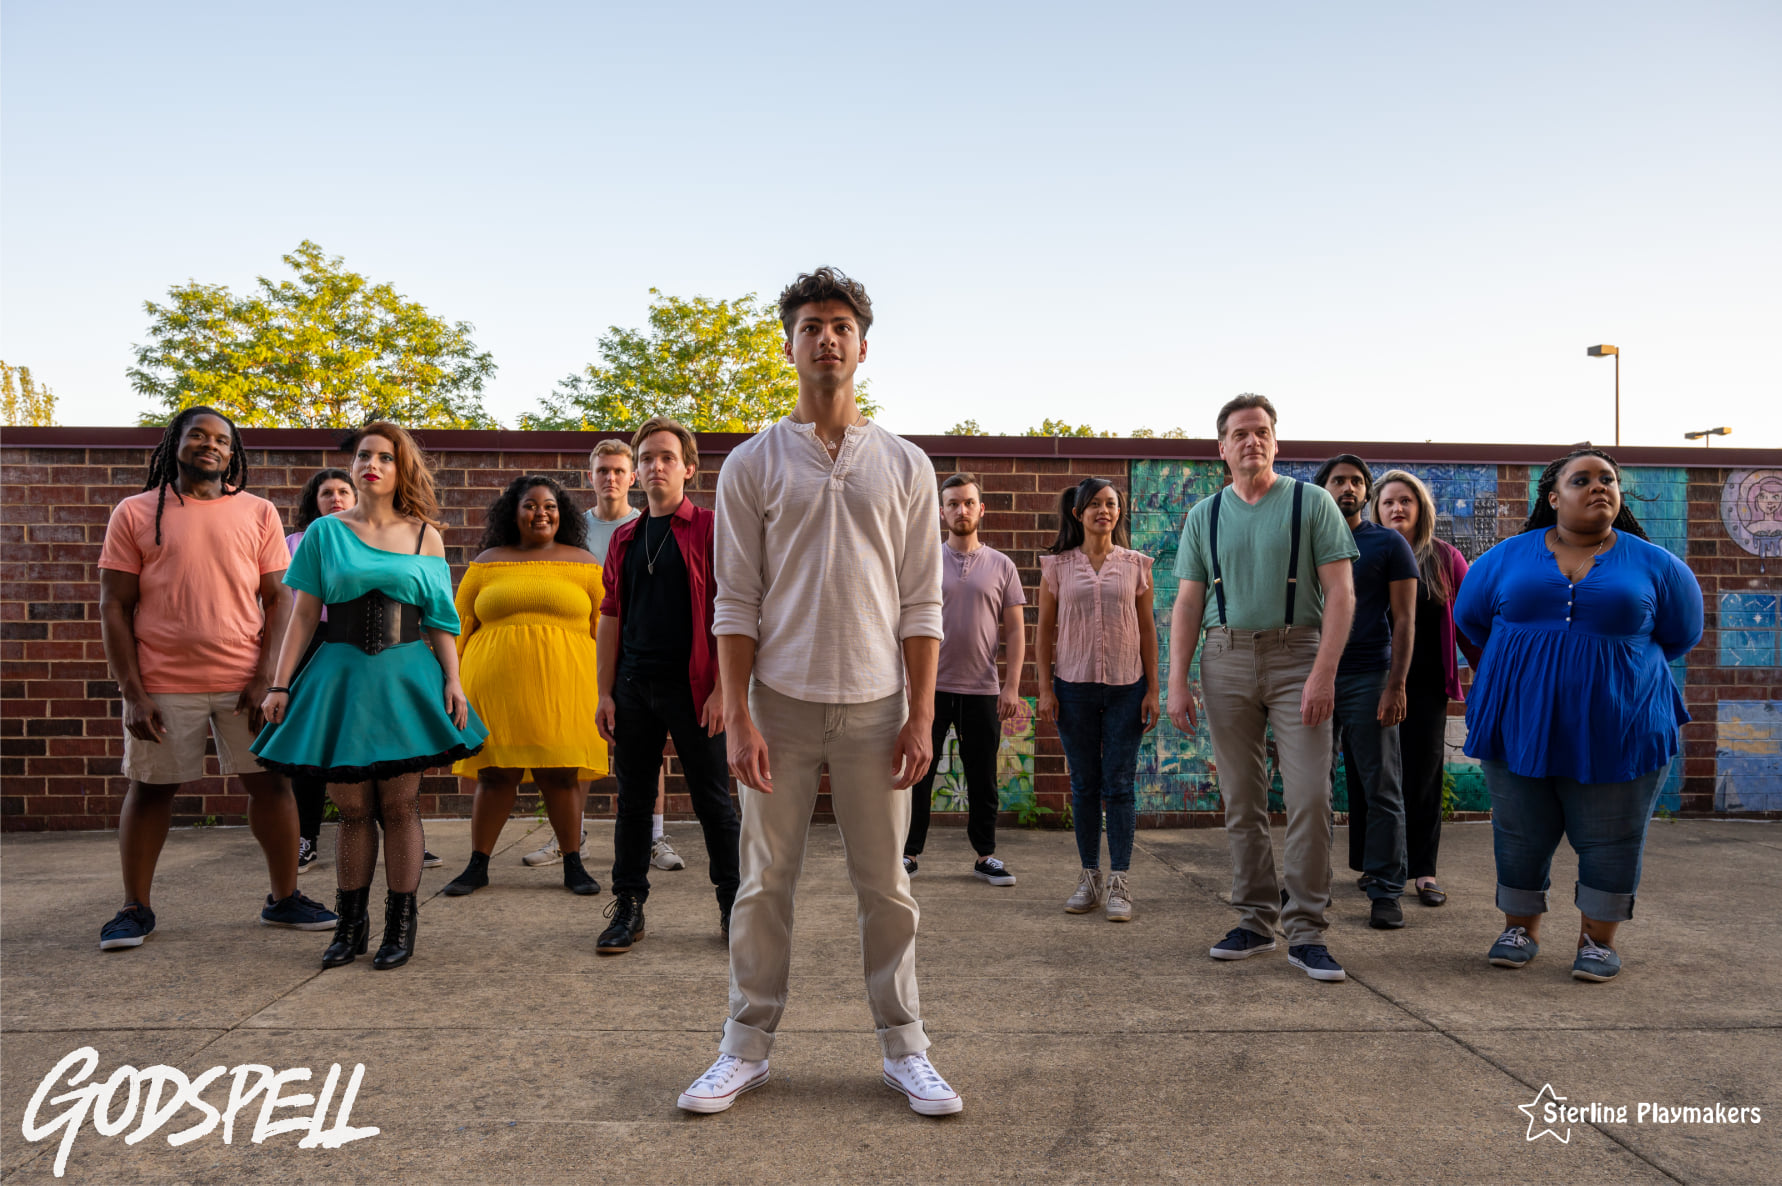 The Cast of Godspell
Alan Price Photography